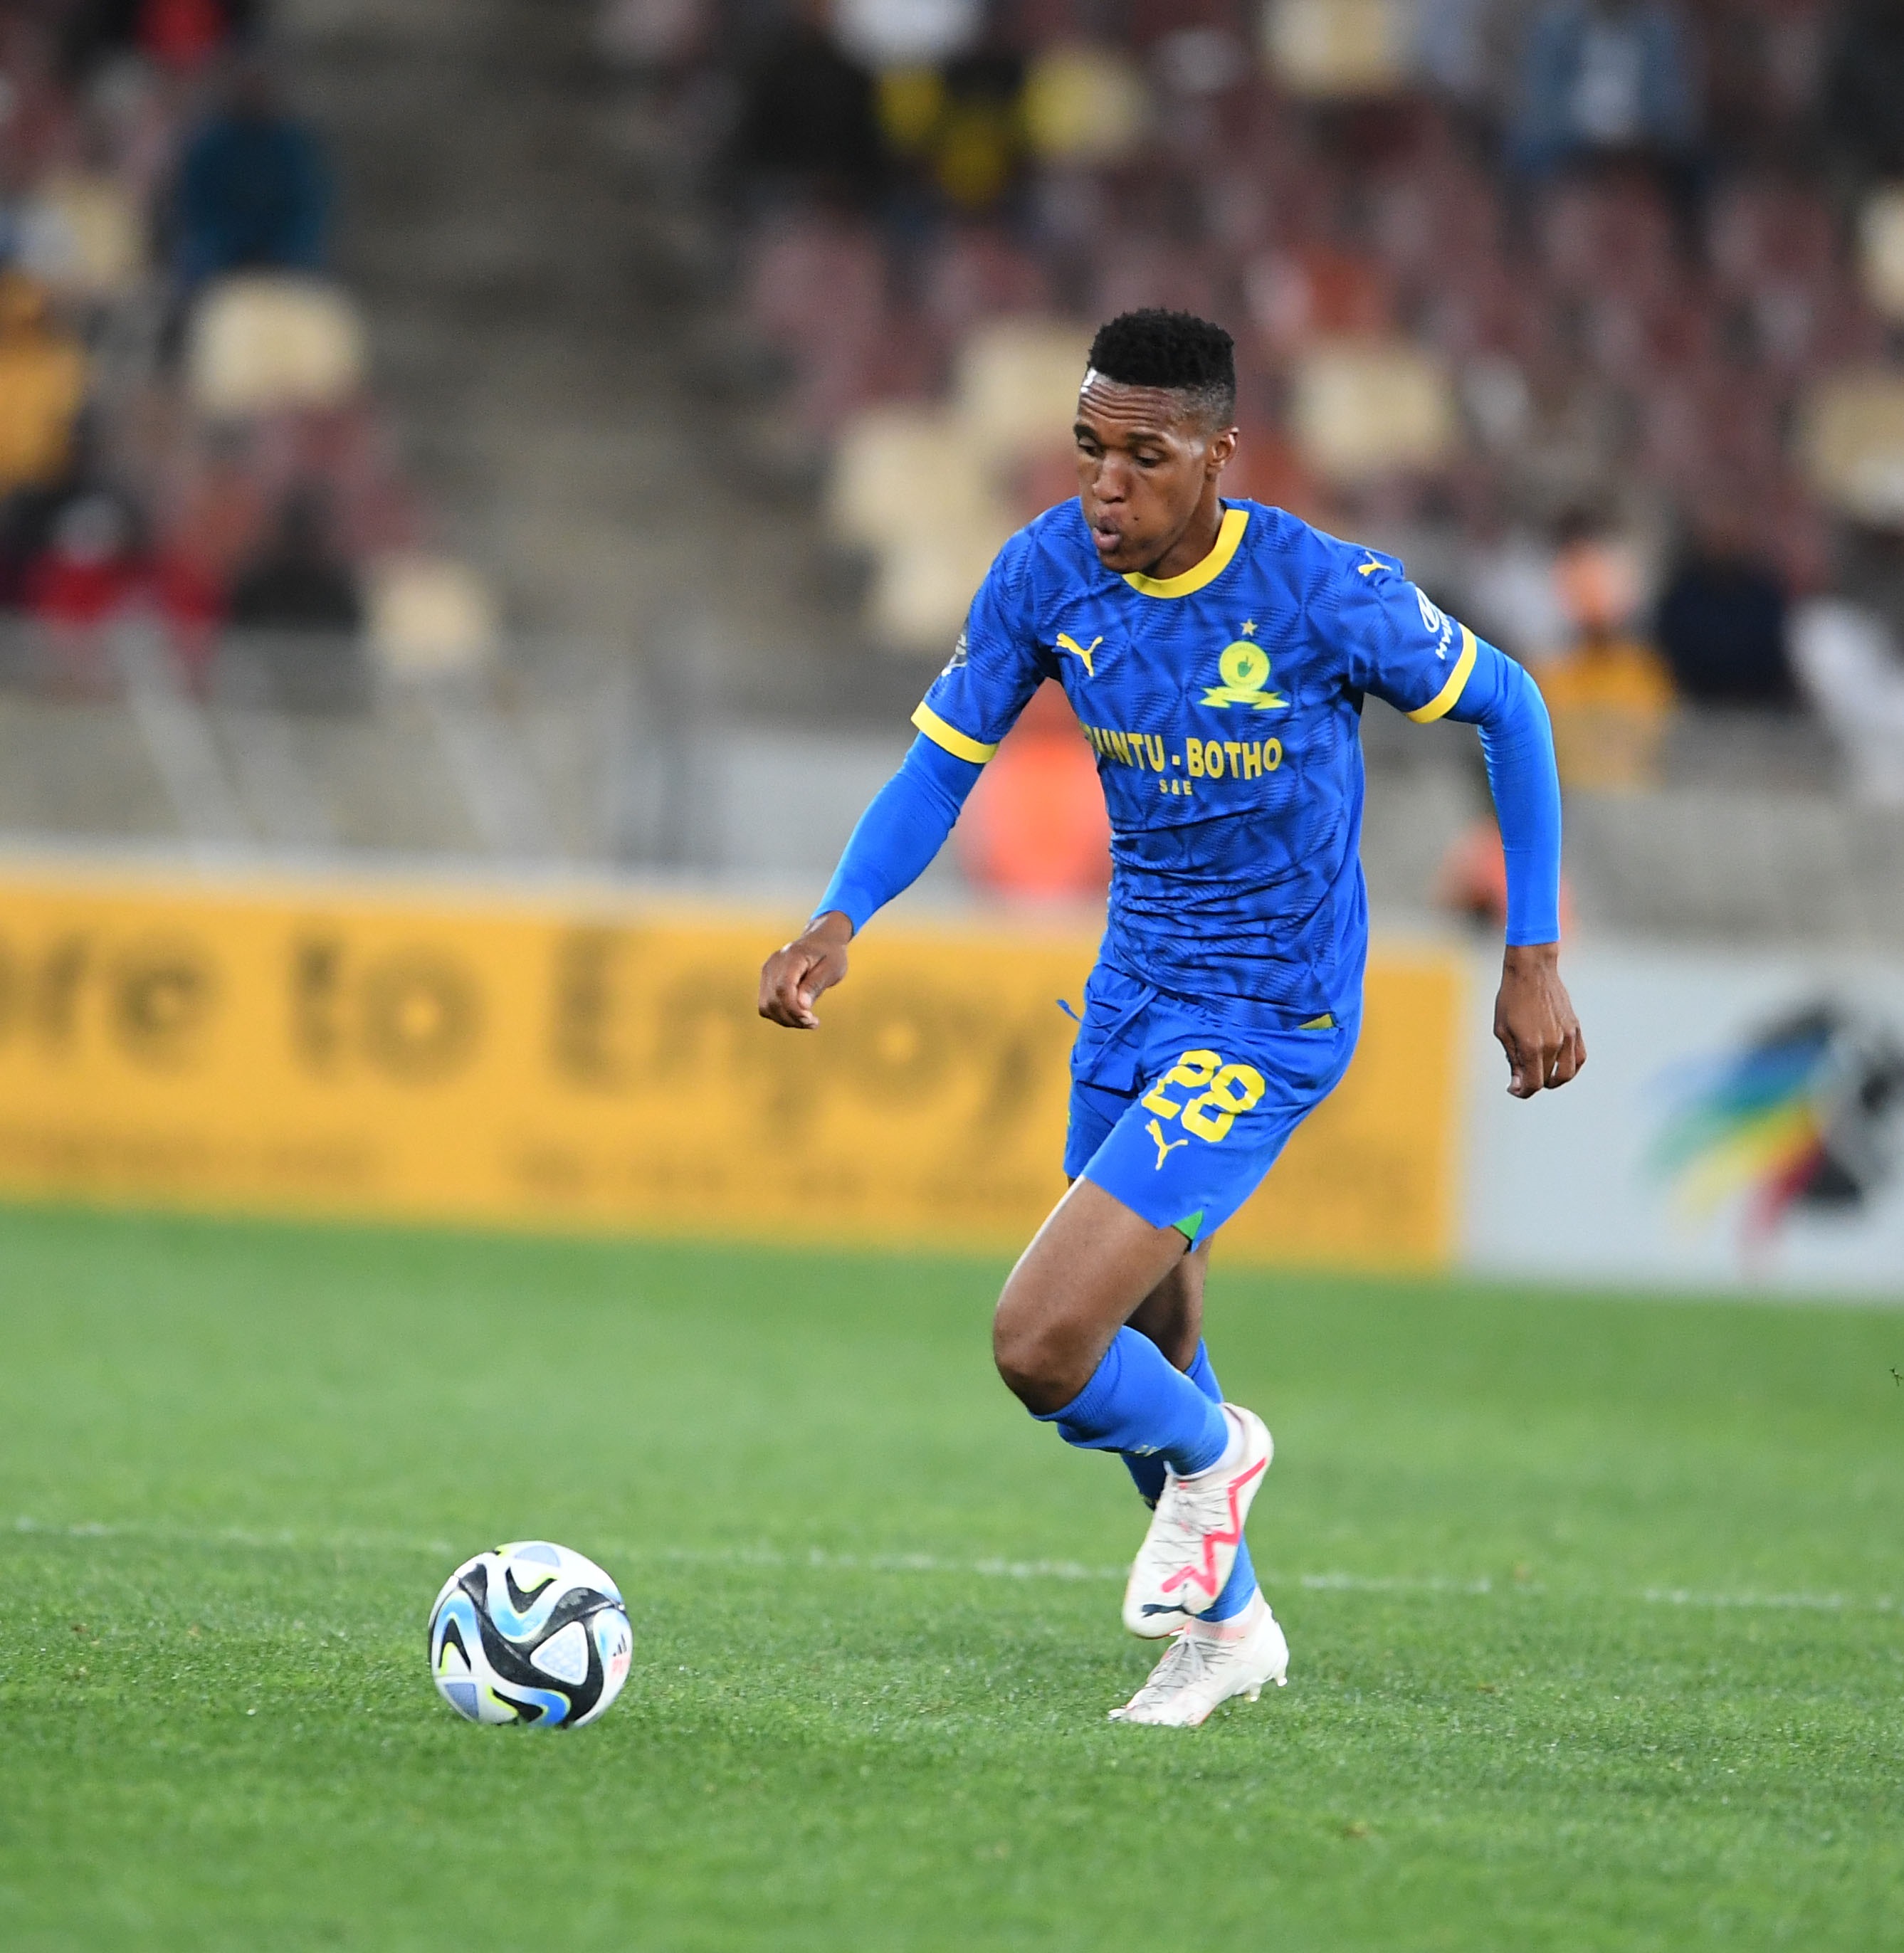 Seabi Attracting Interest In The PSL